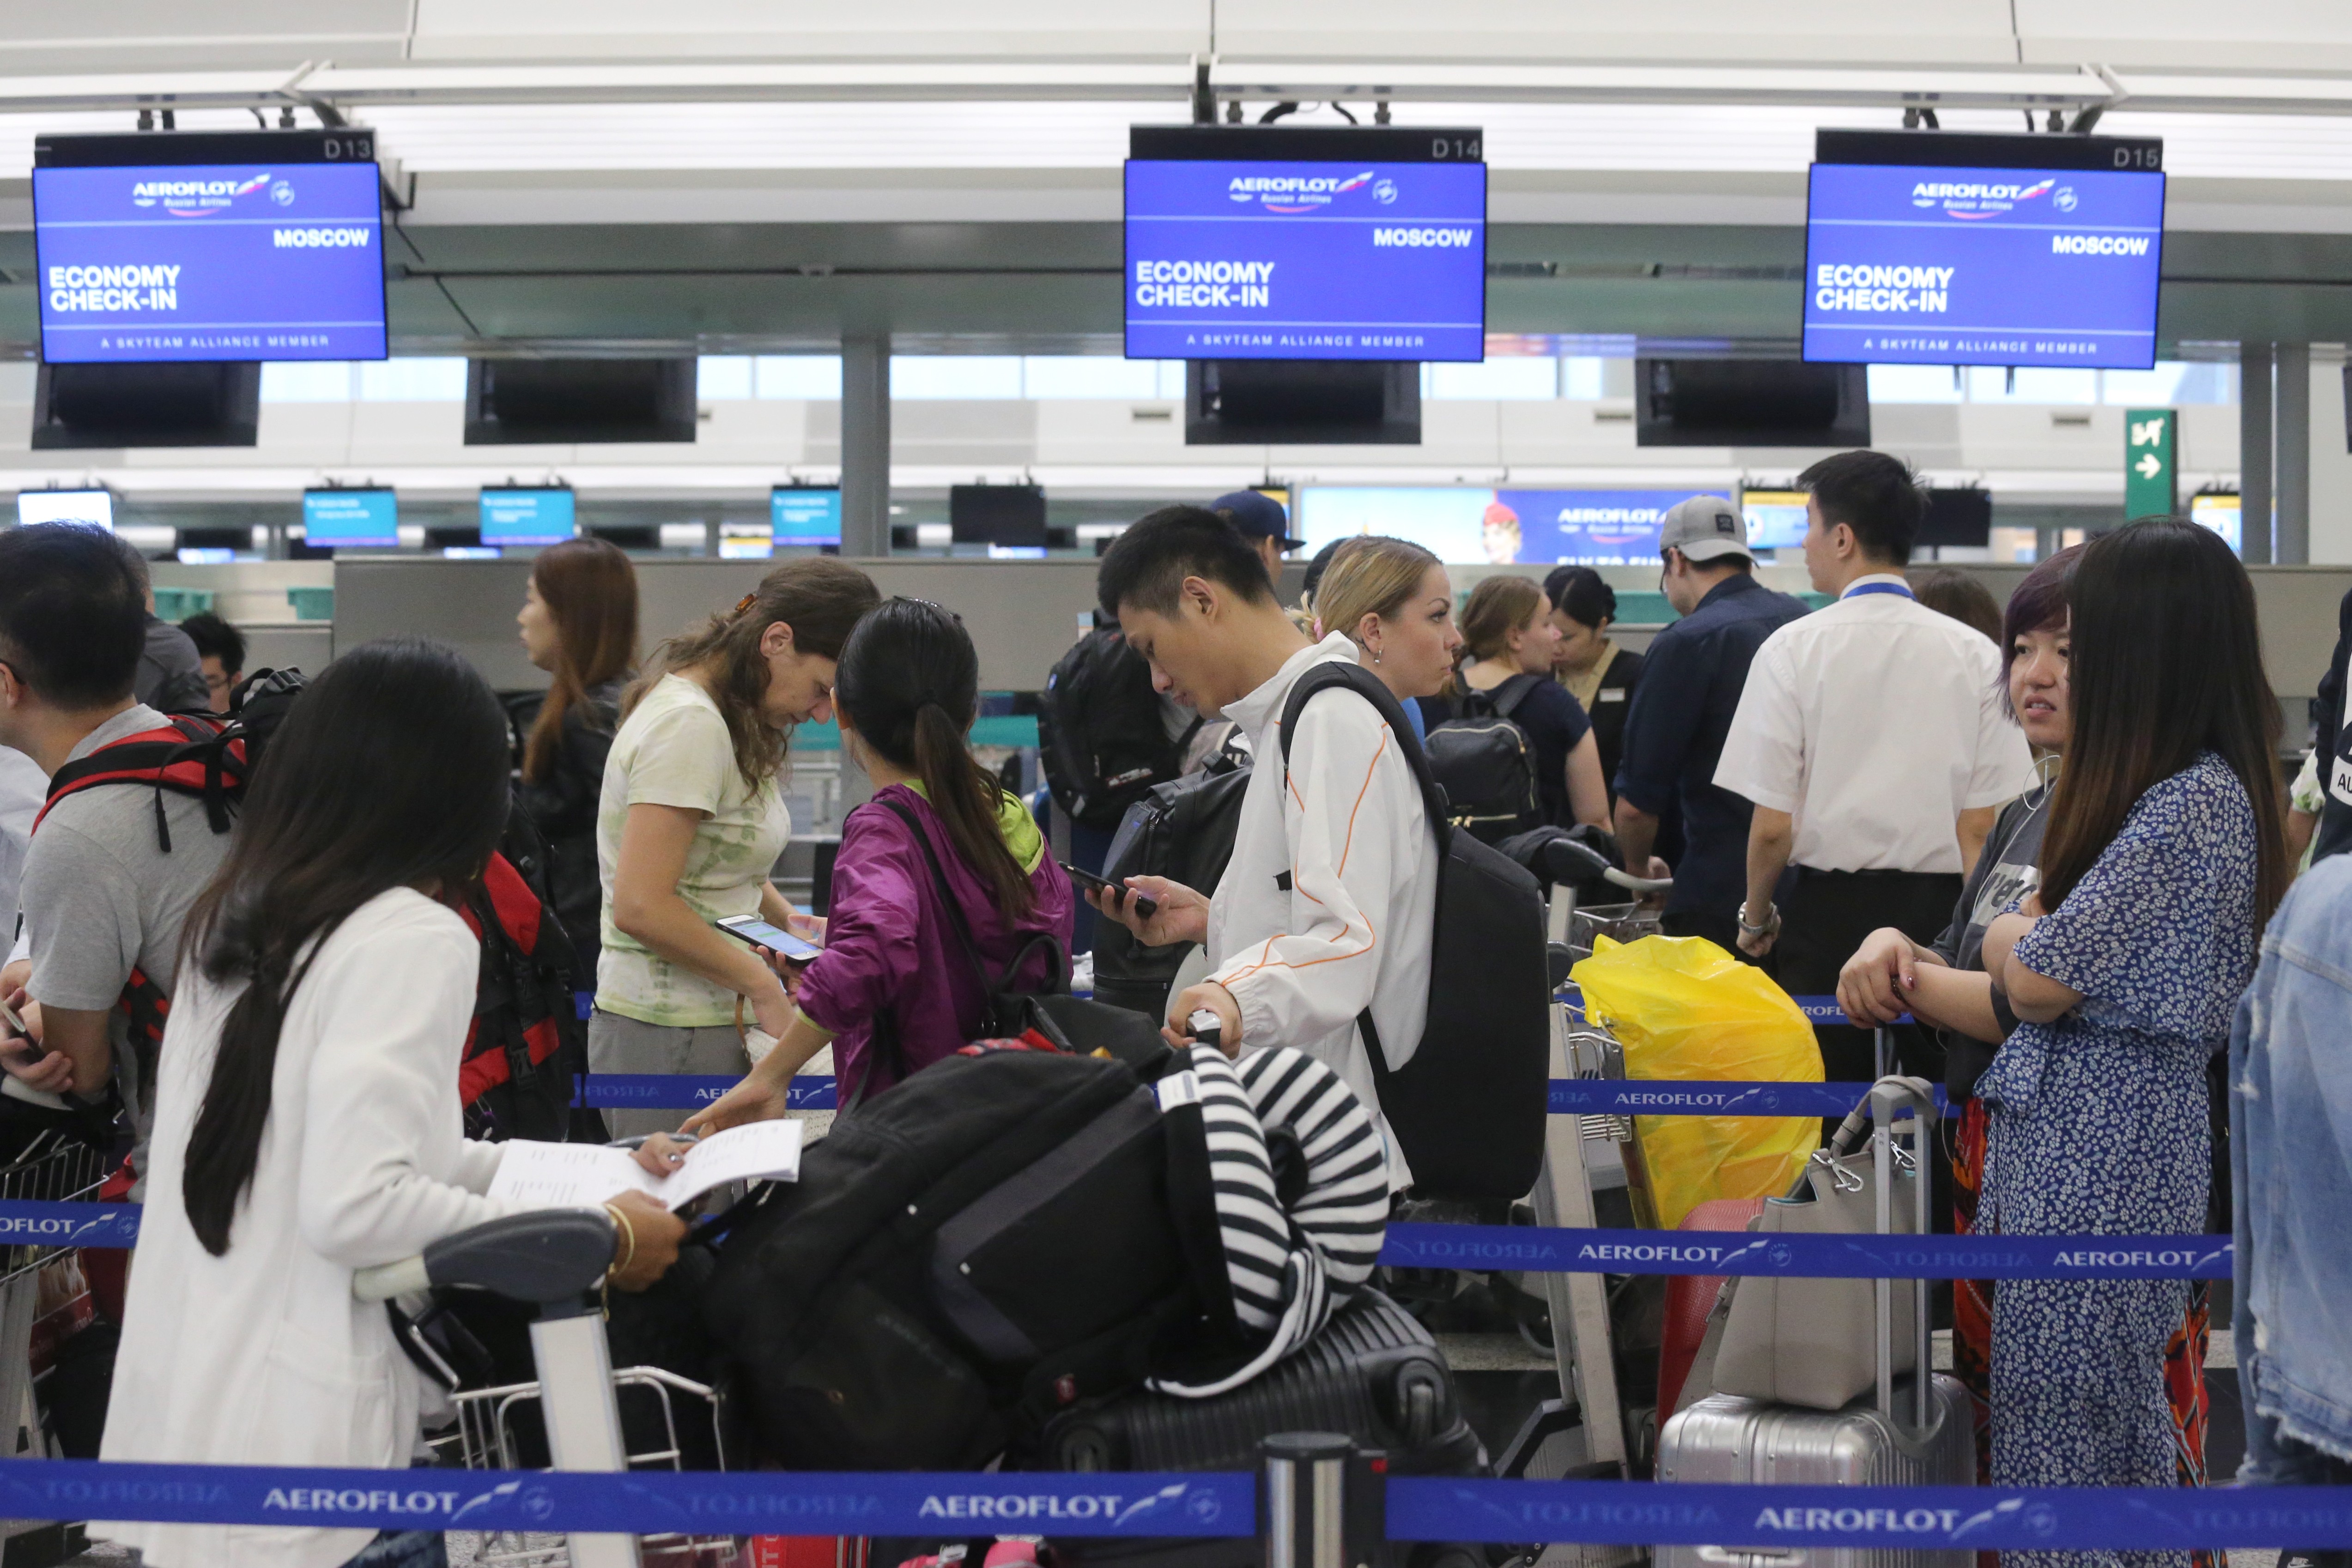 Overbooking cases in Hong Kong are usually resolved at check-in counters. Photo: K. Y. Cheng